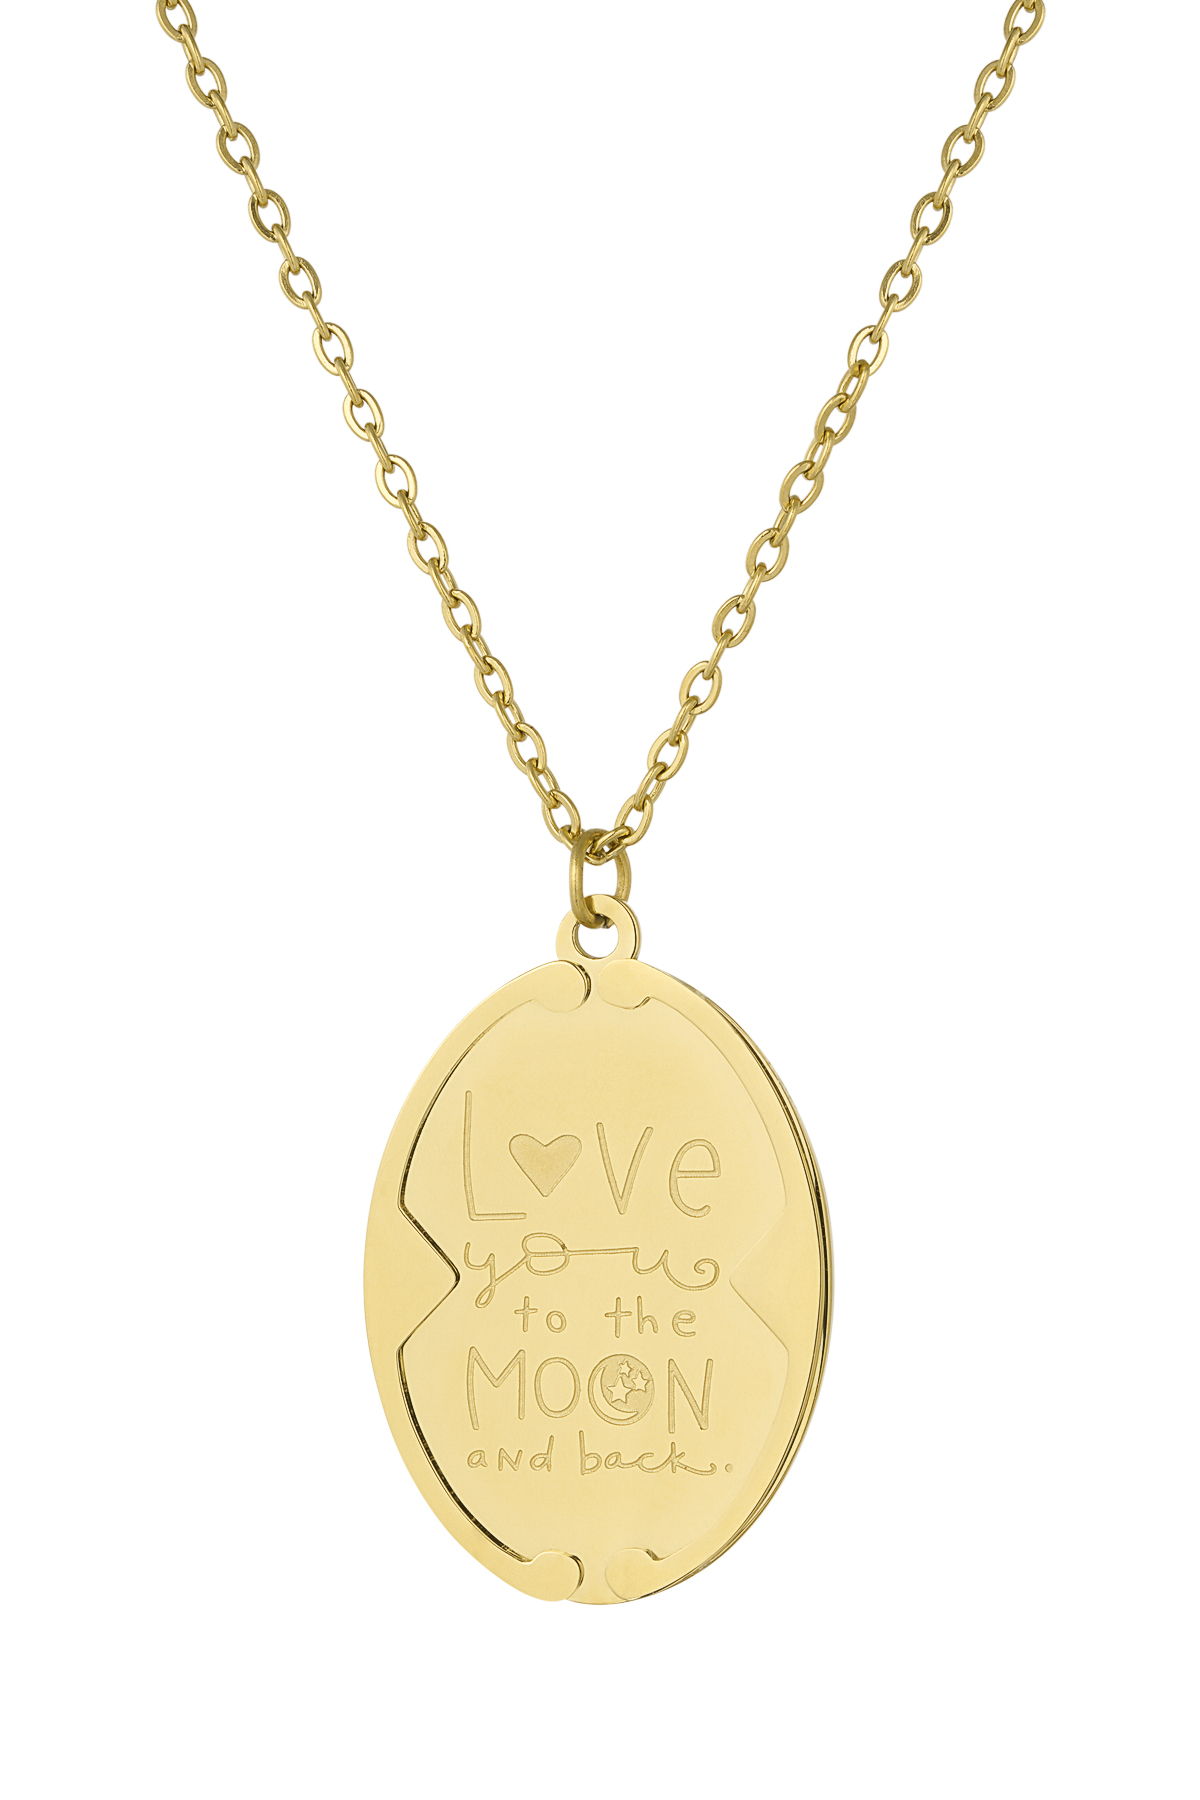 Love you to the moon and back necklace - gold  h5 Picture4